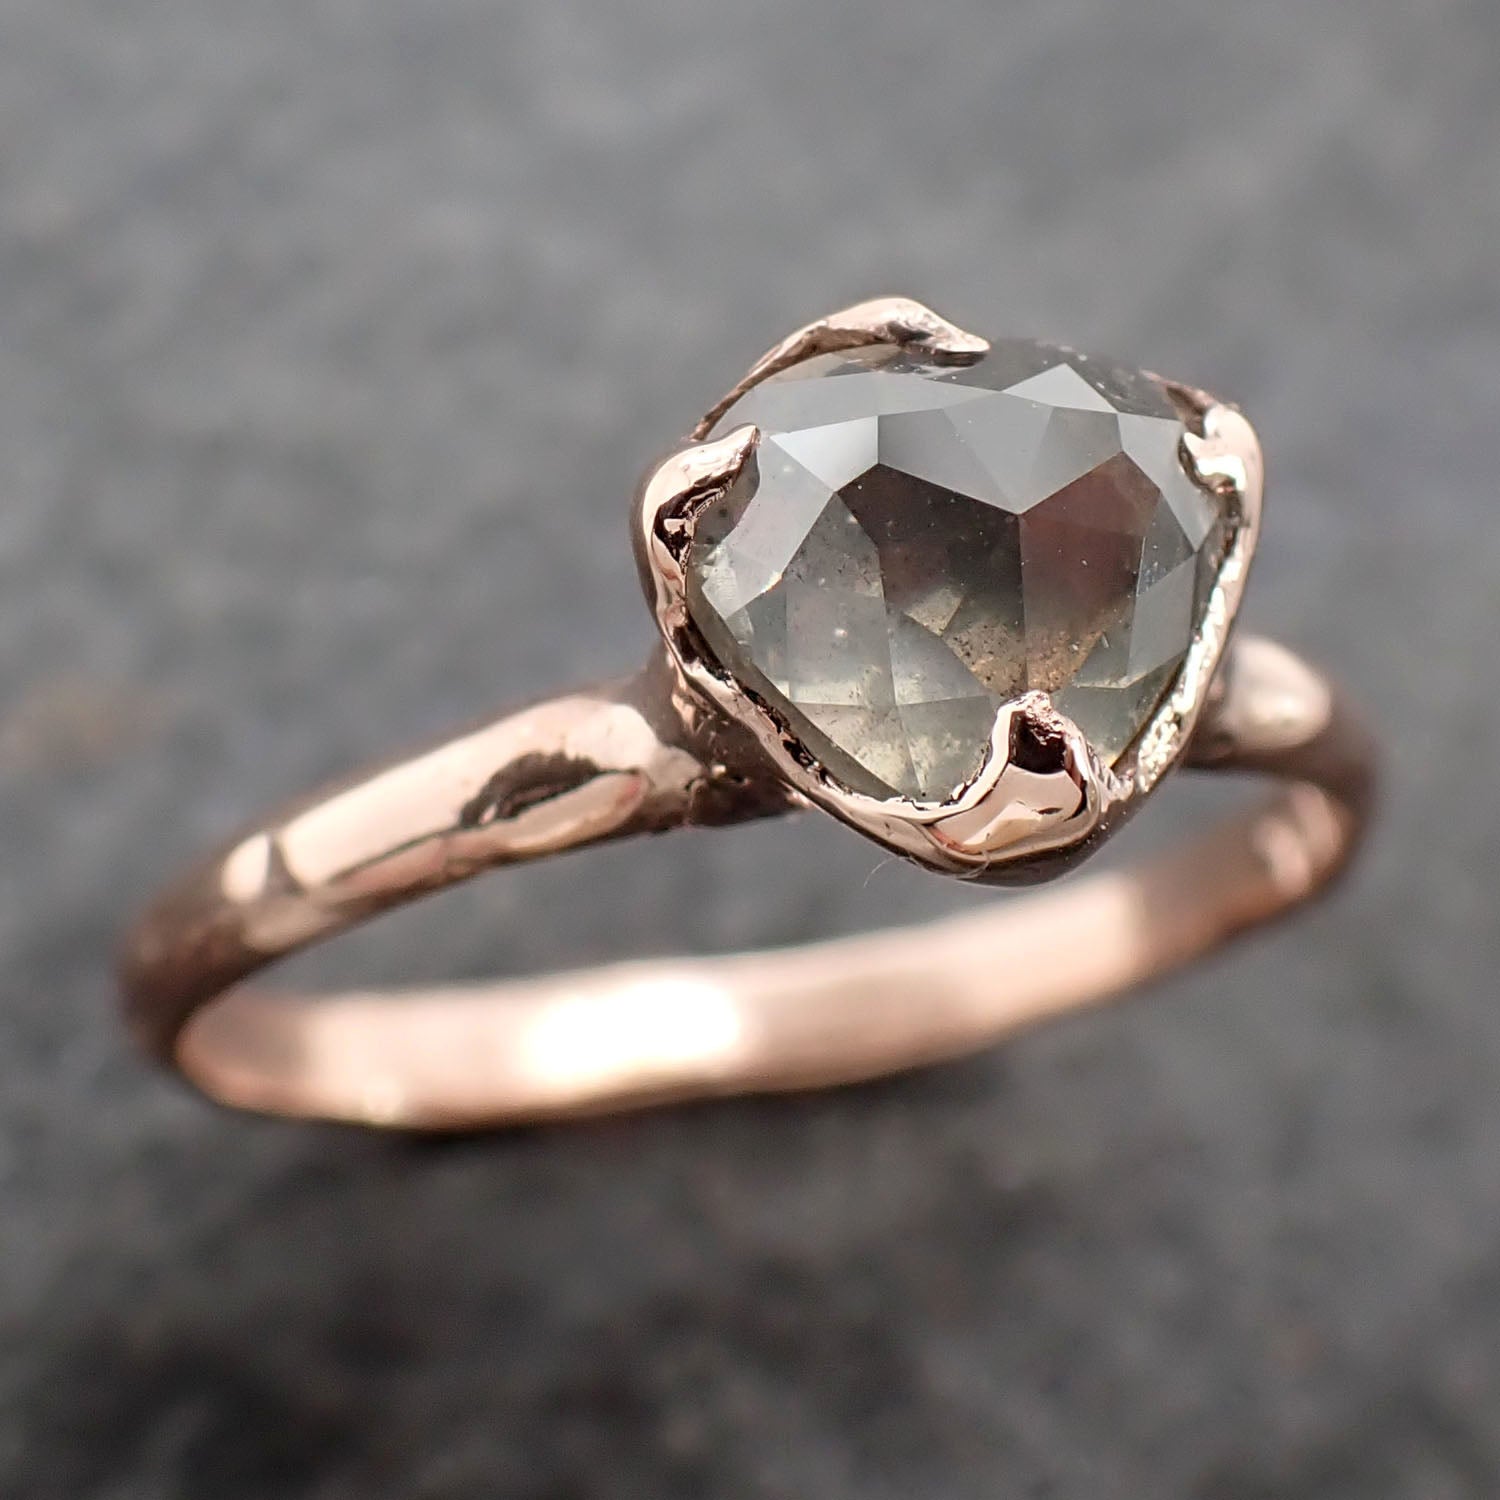 Faceted Fancy cut gray Diamond Solitaire Engagement 14k Rose Gold Wedding Ring byAngeline 2583